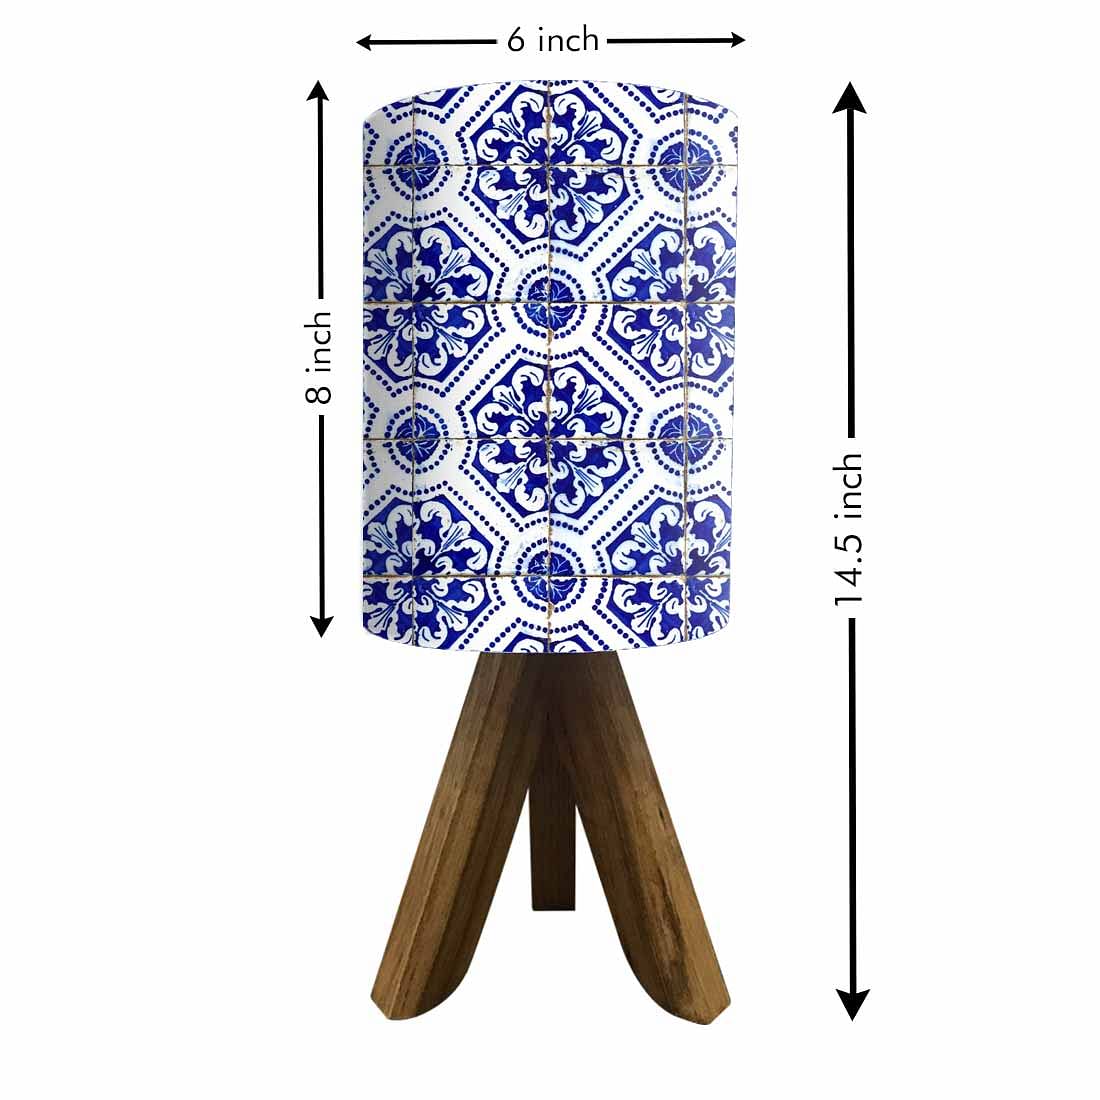 Wooden Table Lamps For Bedroom - Dotted Blue Flower Tiles Nutcase